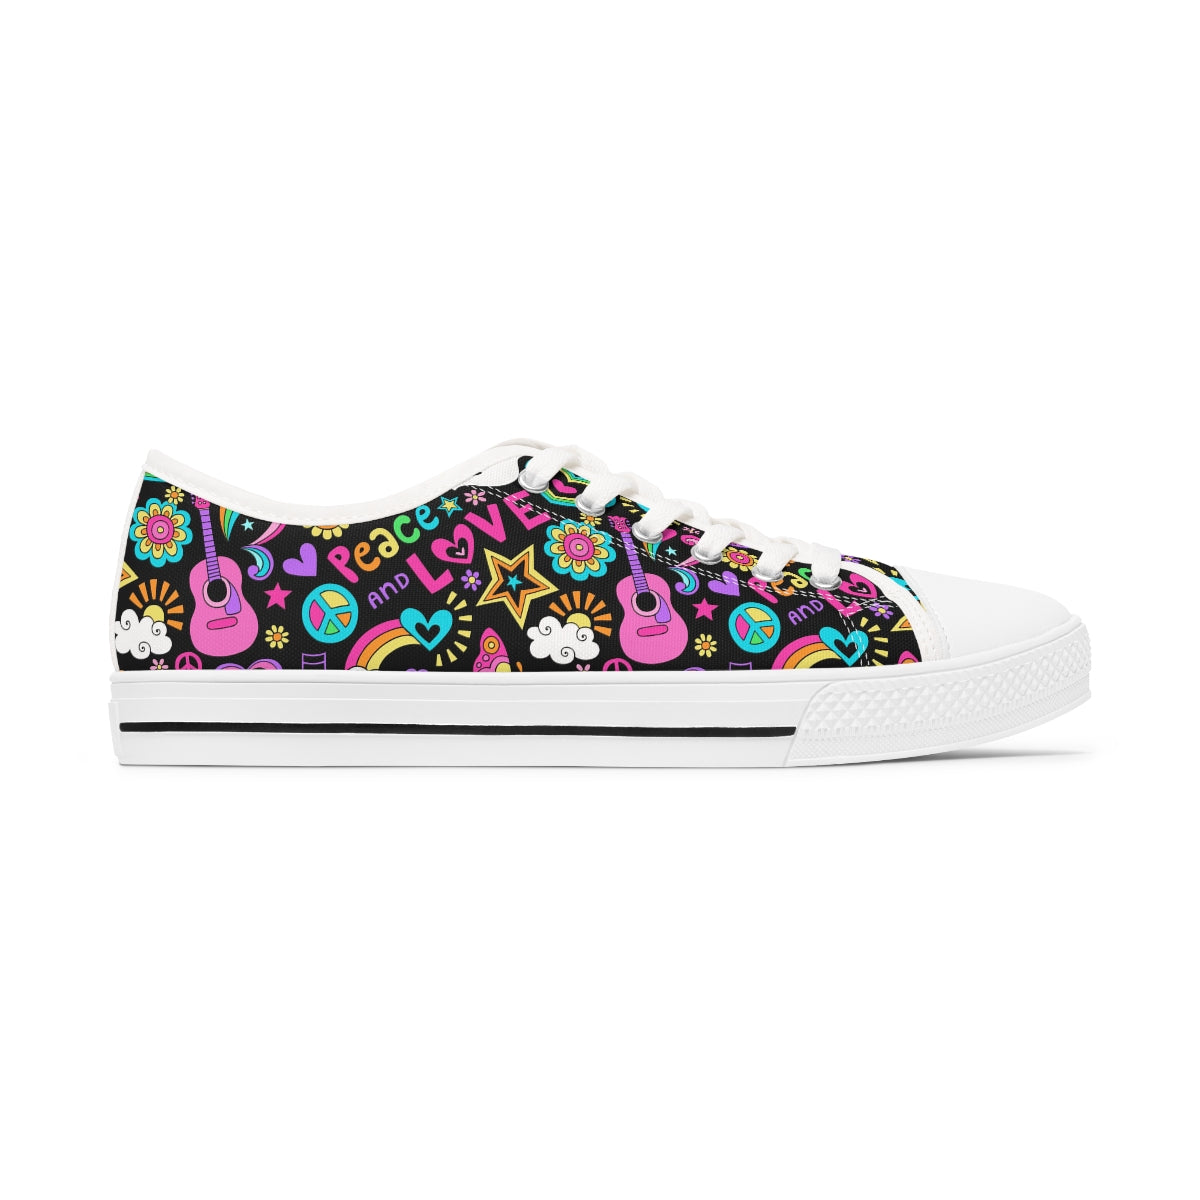 Peace Love Print - Women's Low Top Sneakers ( Black or White Sole )